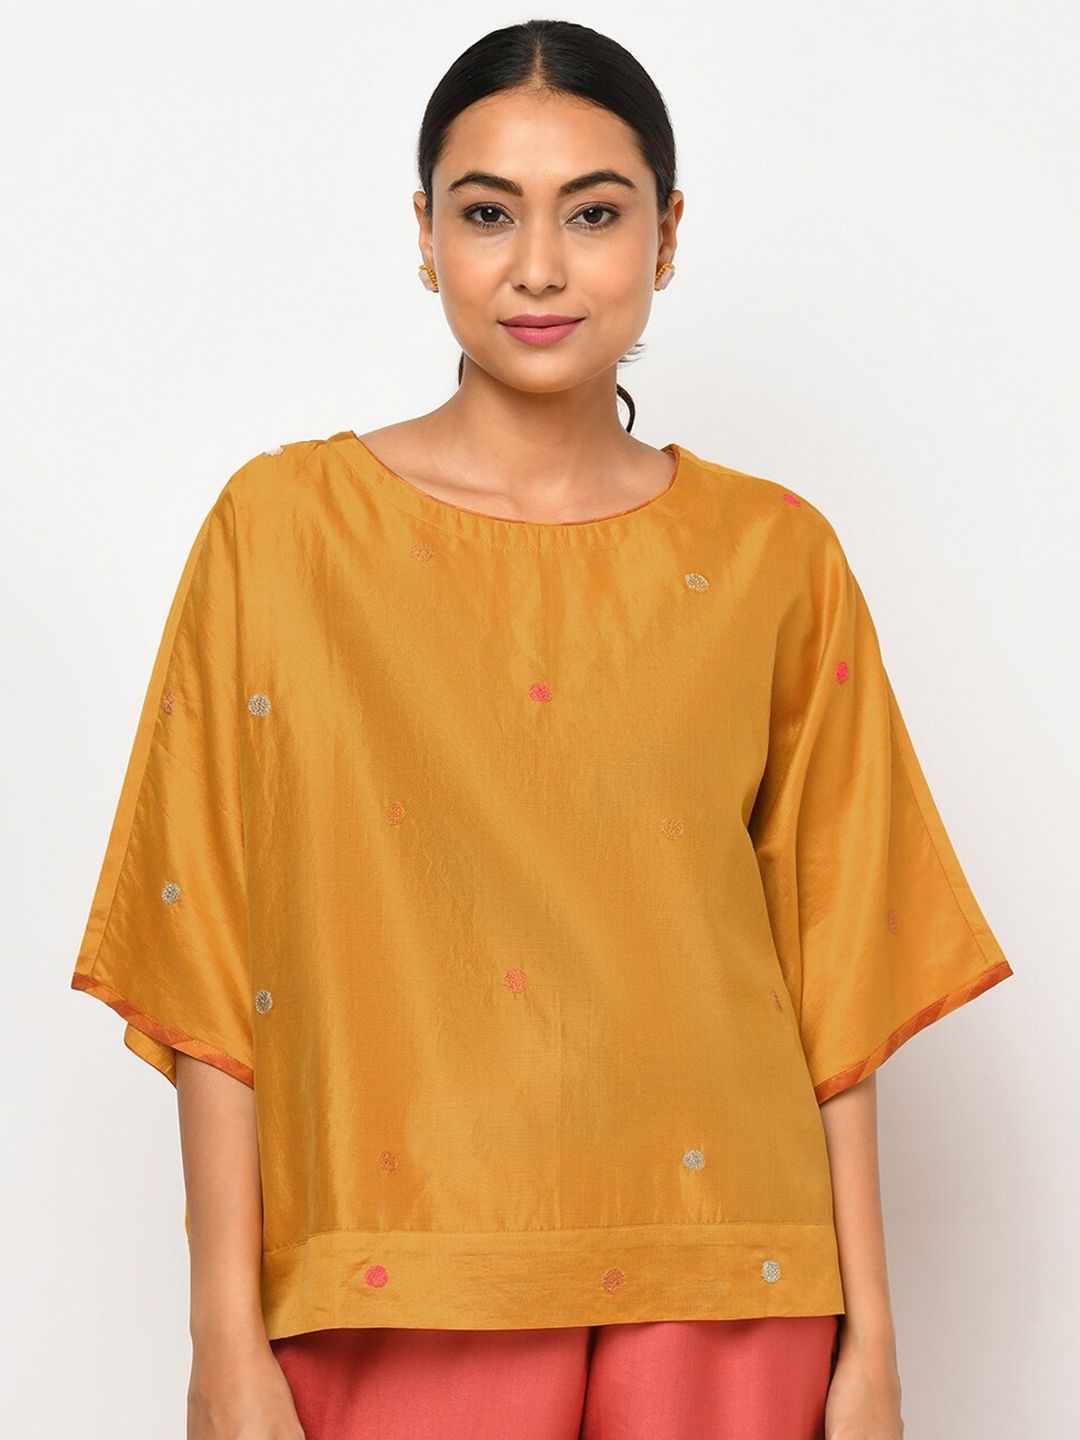 Fabindia Mustard Yellow Geometric Embroidered Extended Sleeves Regular Top Price in India